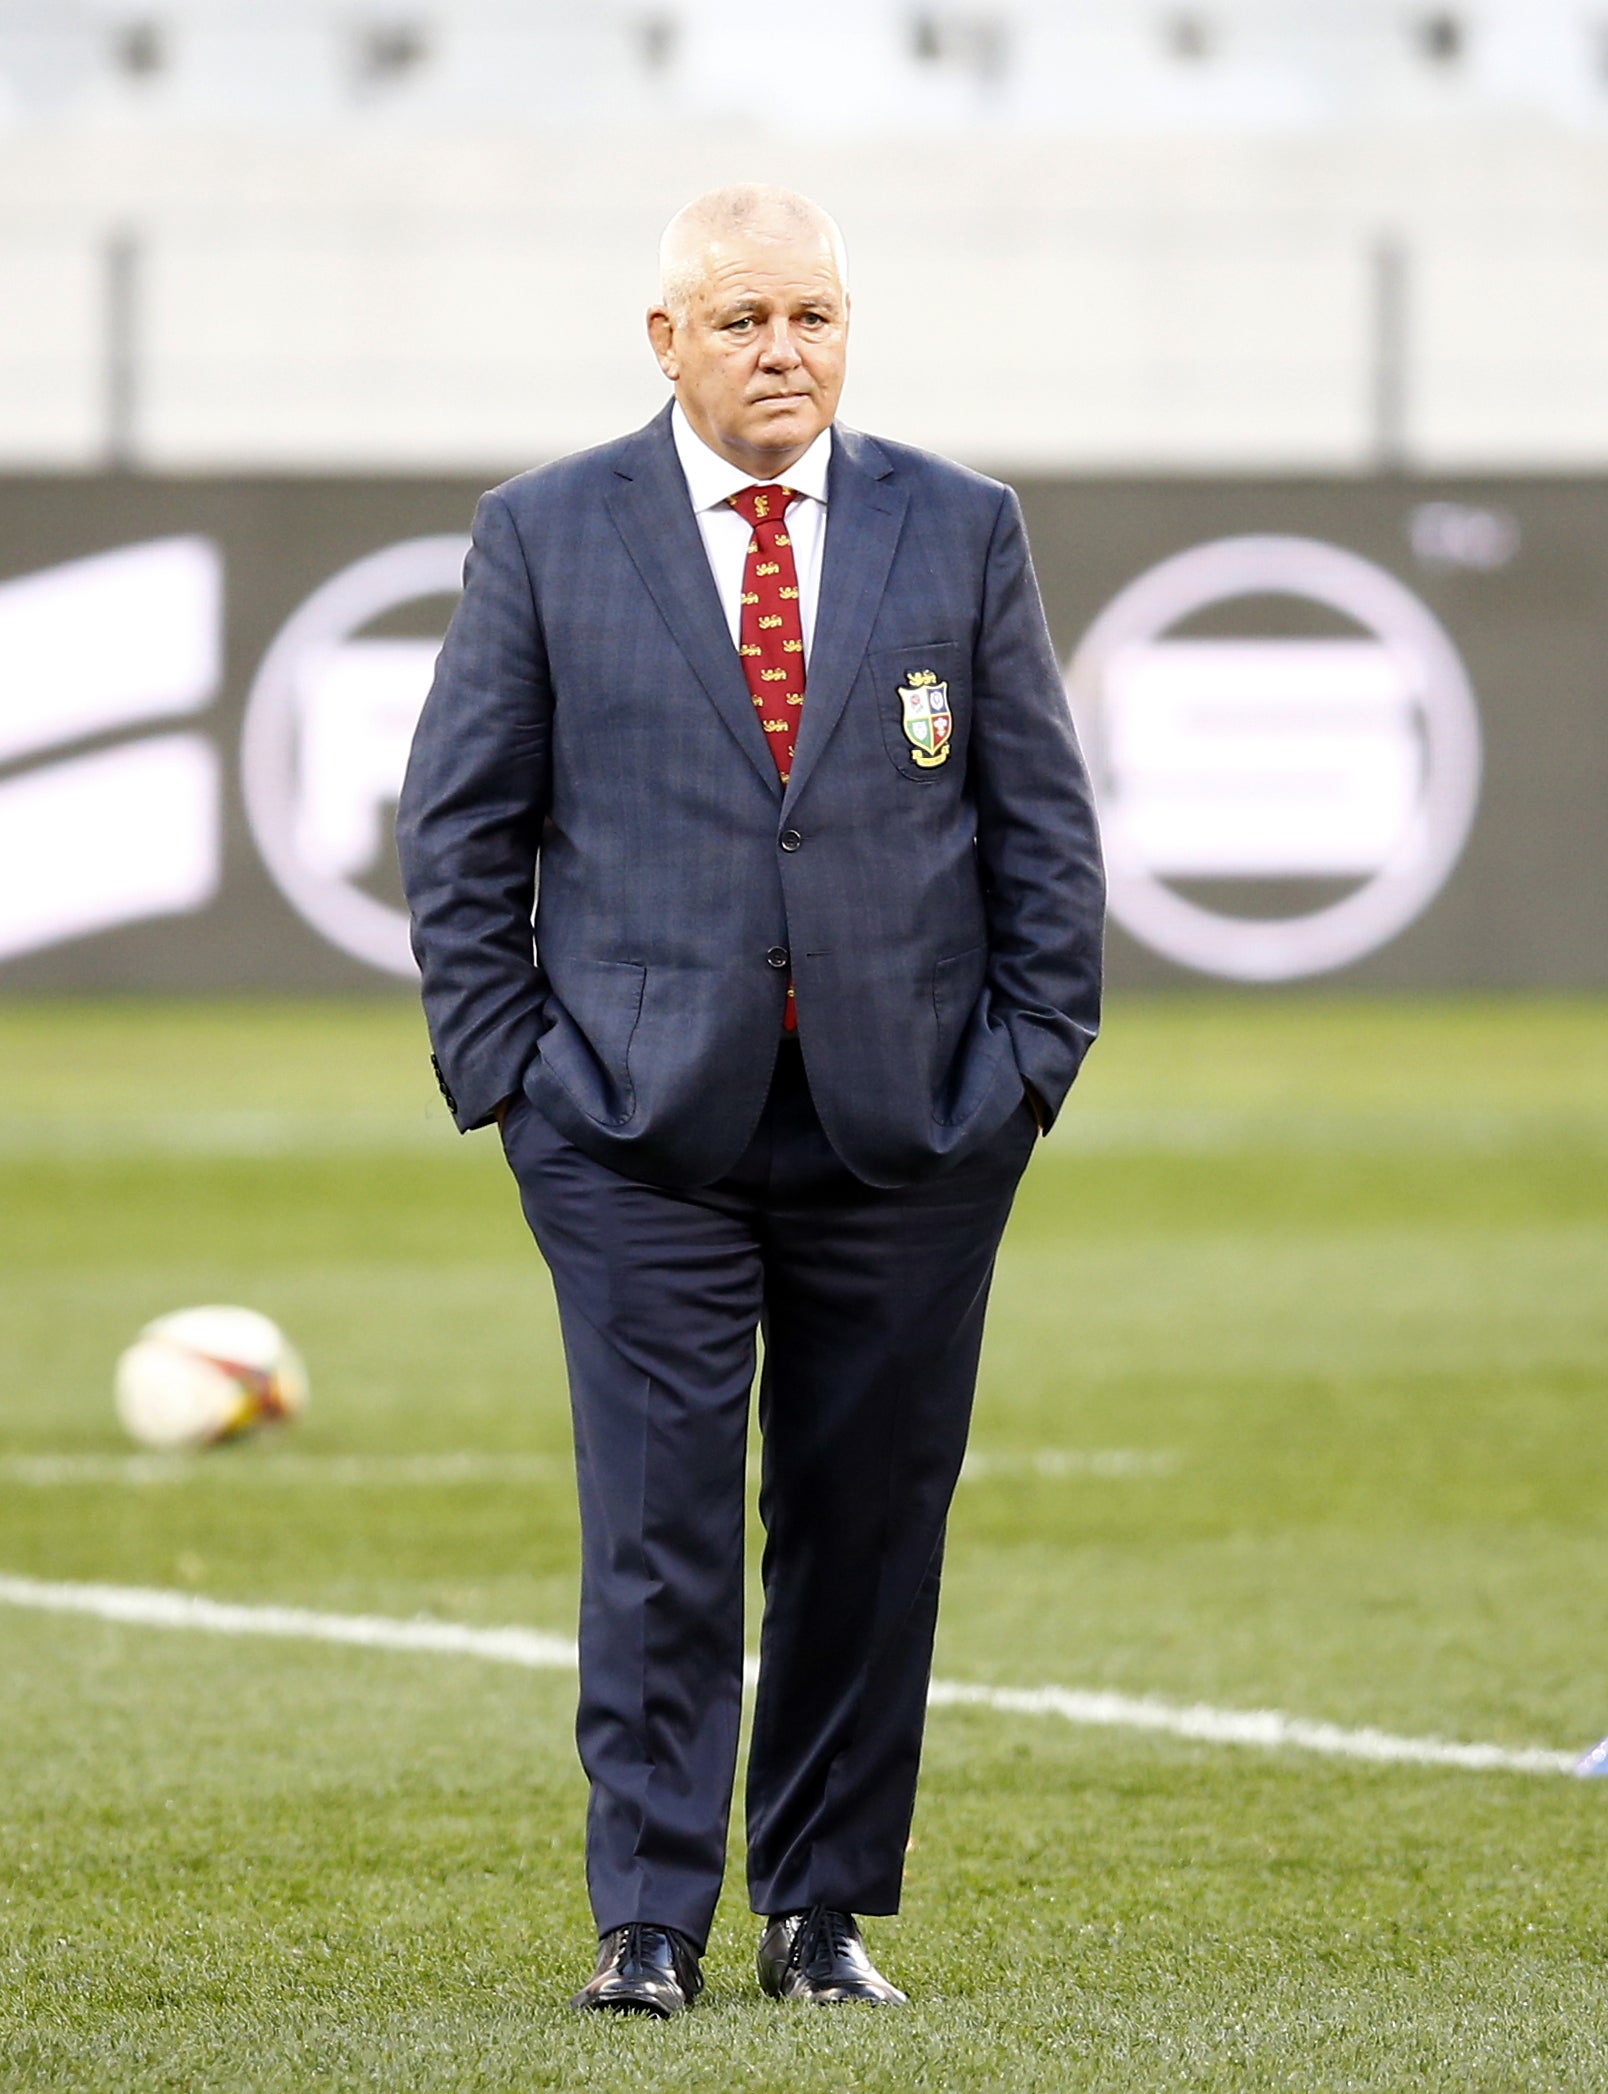 Warren Gatland, pictured, has led the Lions on three successive tours (Steve Haag)